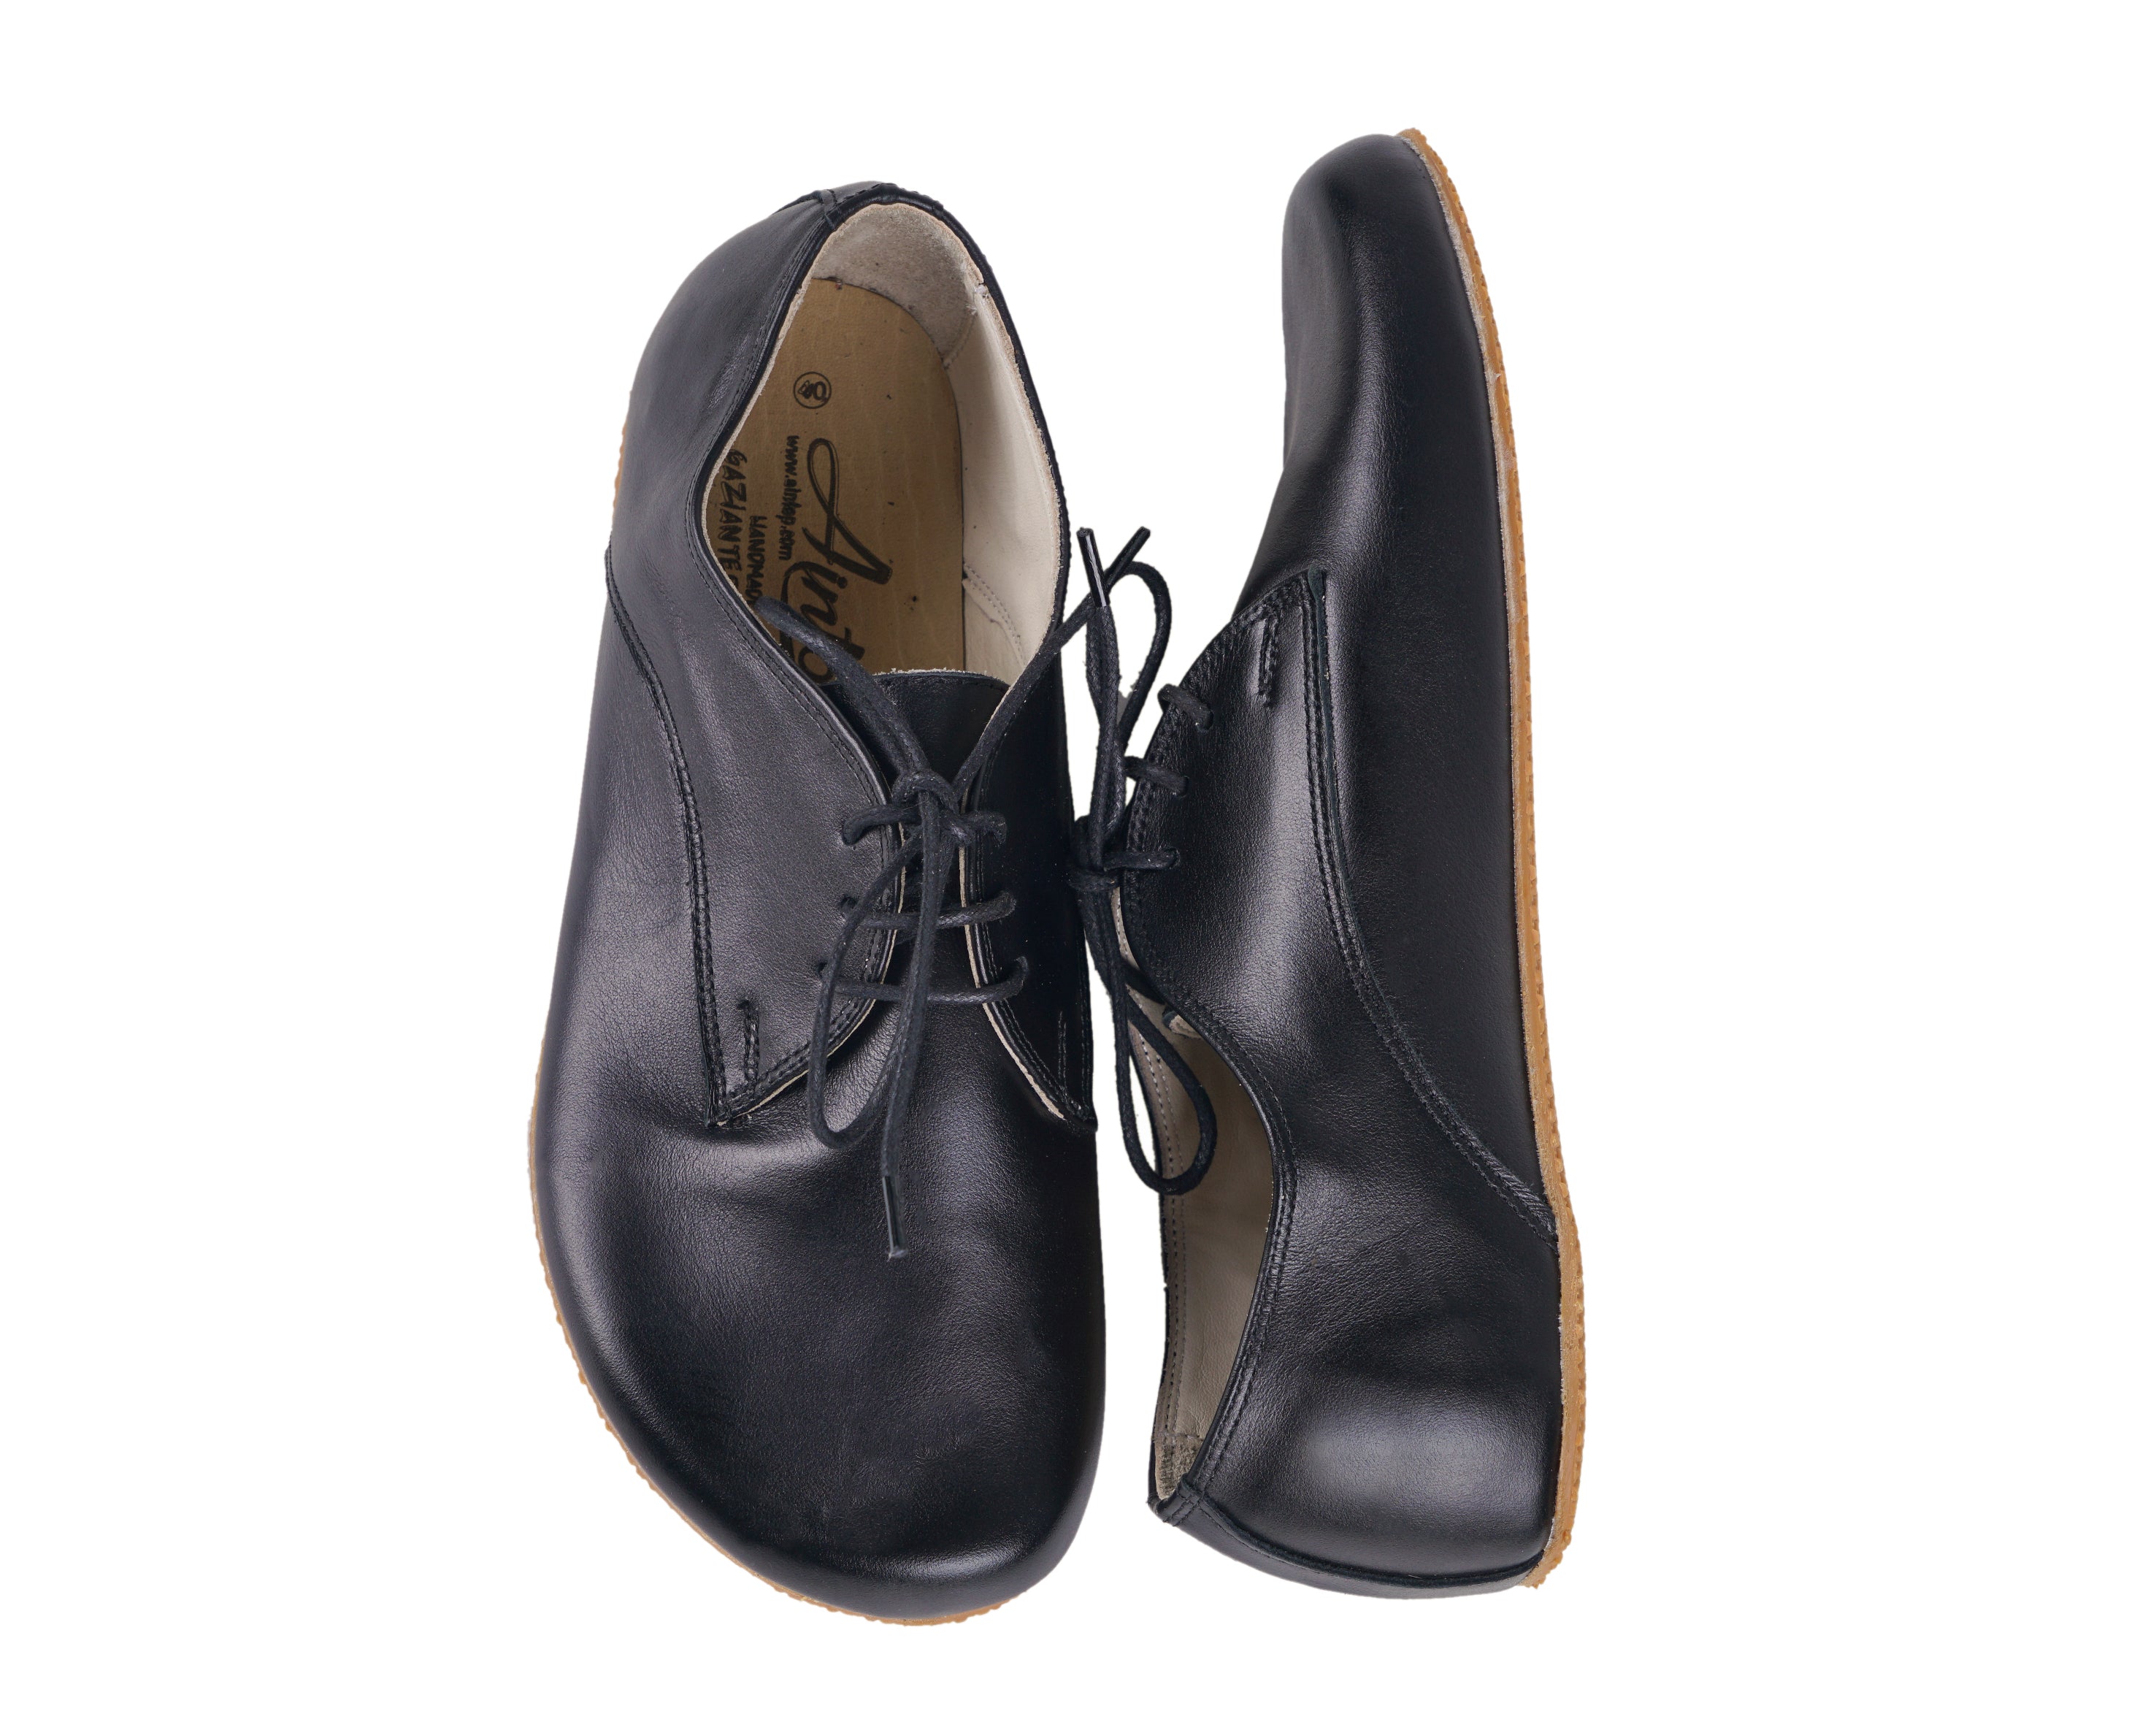 Black Oxford Wide Barefoot Shoes Smooth Leather Handmade 4mm Rubber Outsole